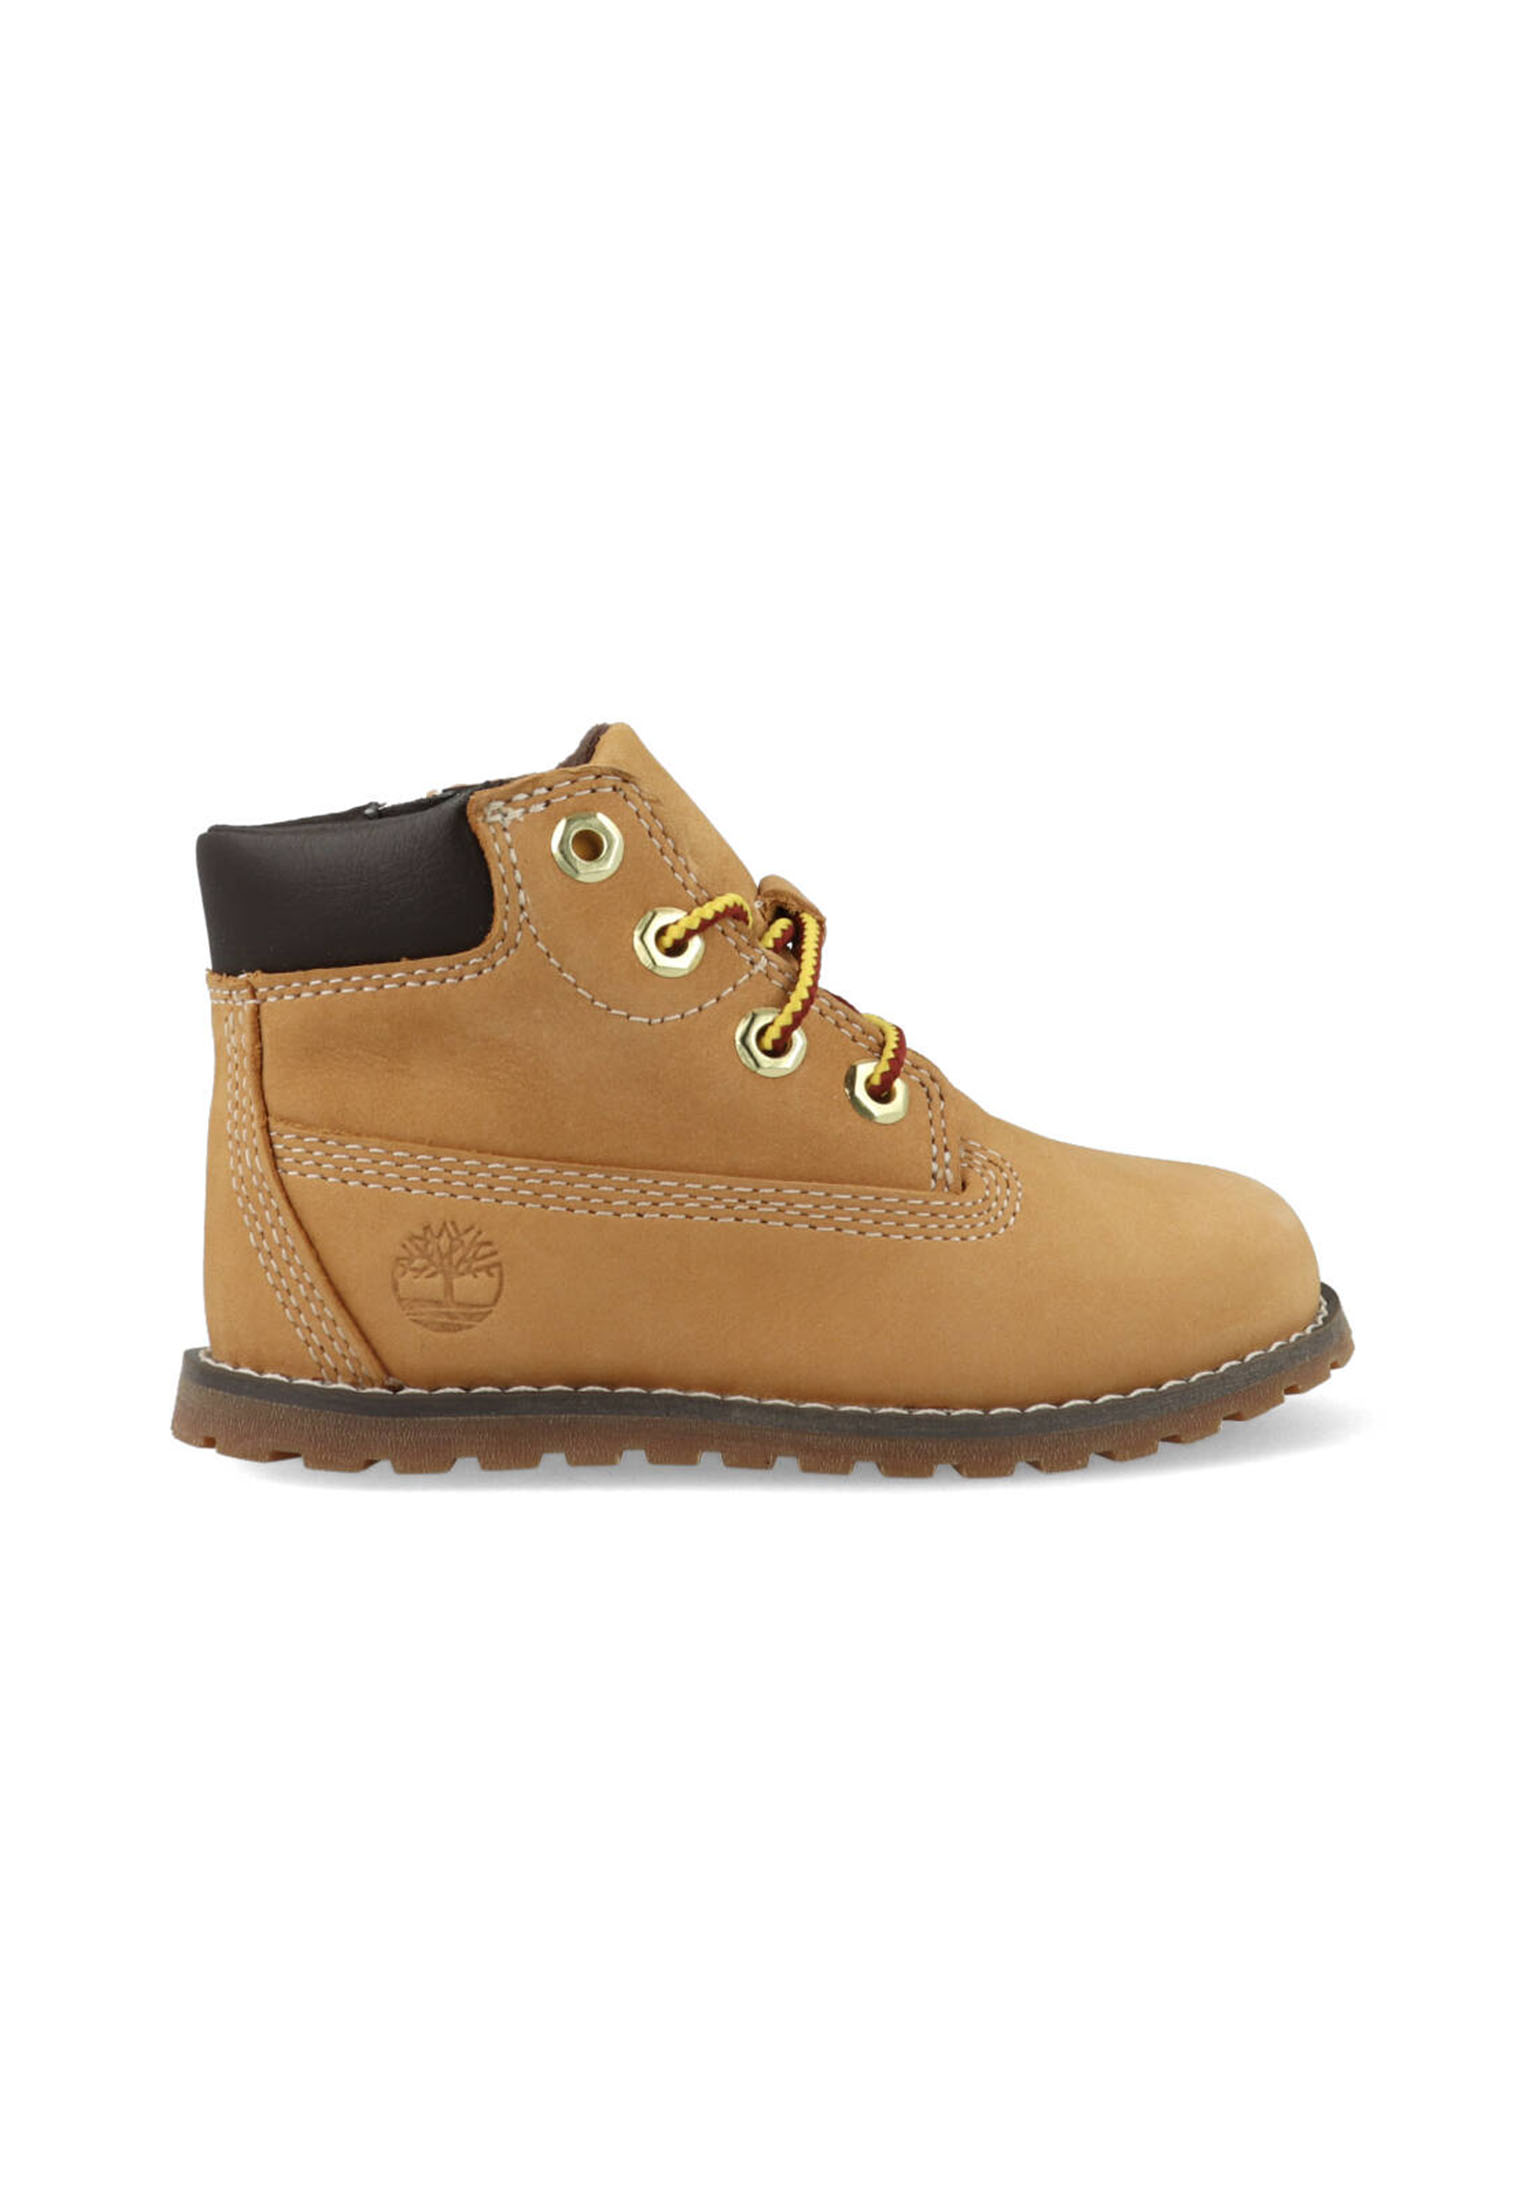 Timberland Pokey Pine 6 inch Boots A125Q Bruin 26 maat 26